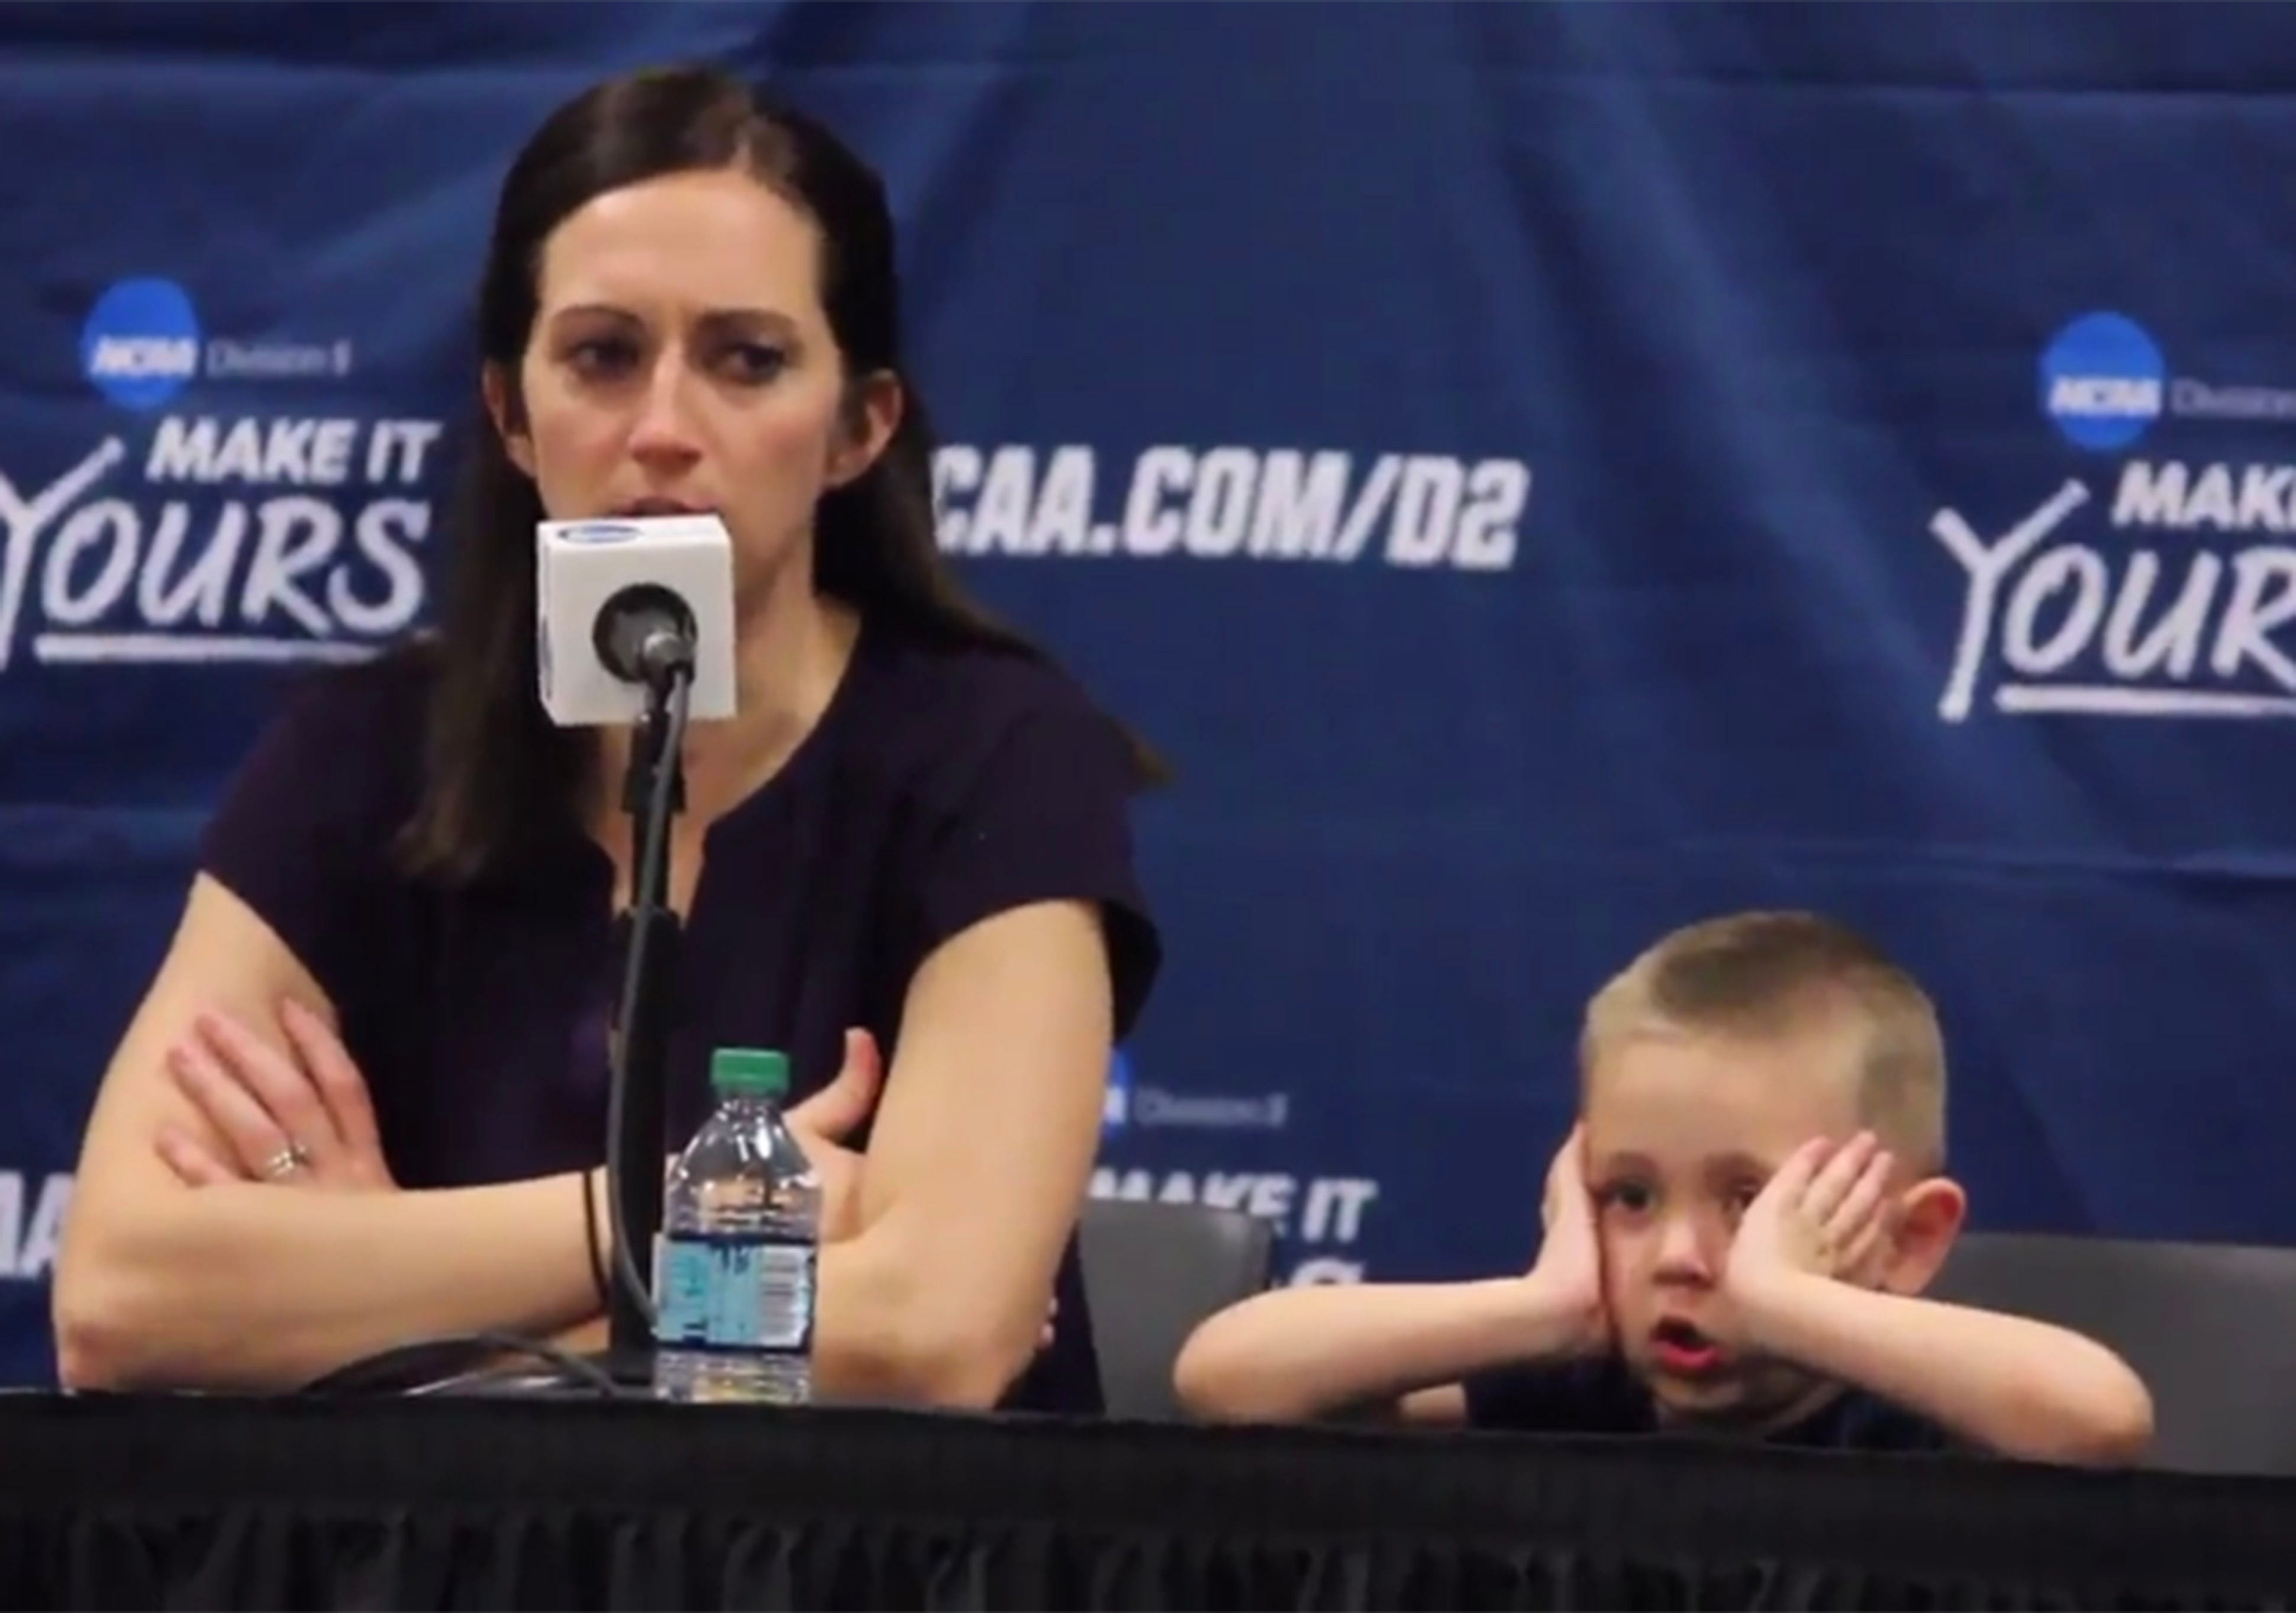 Coach's 3-year-old son becomes star of presser